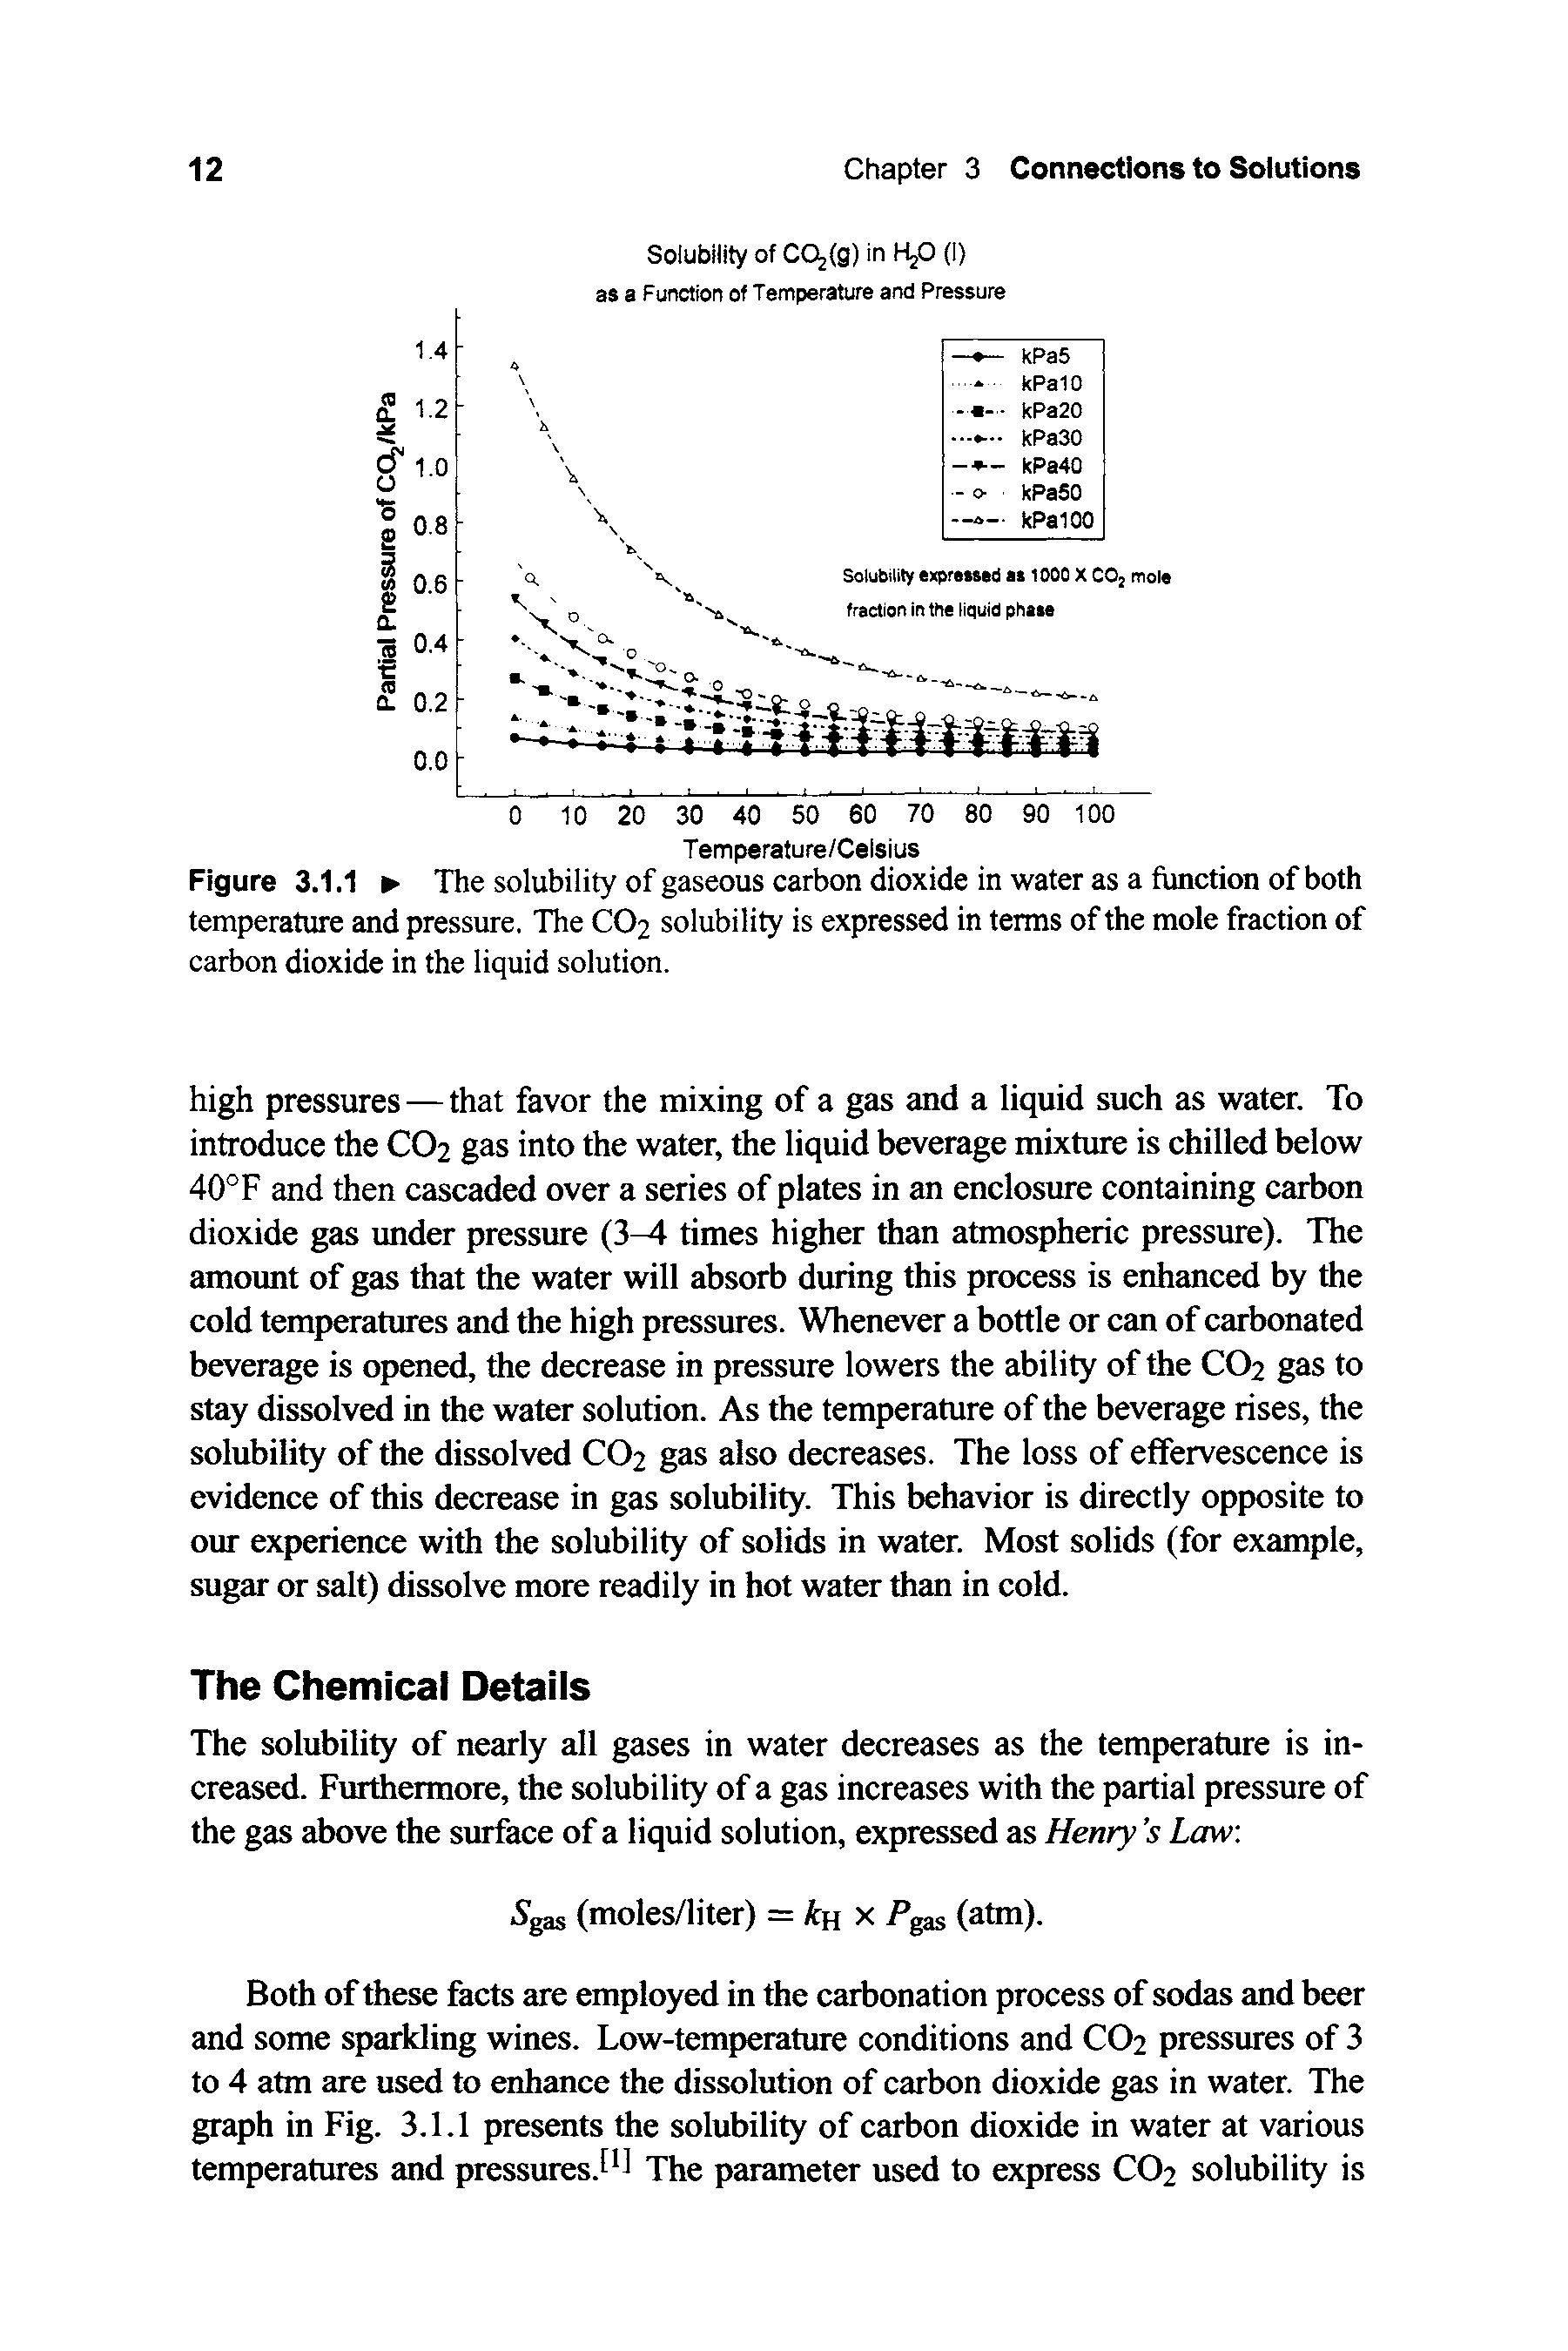 Figure 3.1.1 The solubility of gaseous carbon dioxide in water as a function of both temperature and pressure. The CO2 solubility is expressed in terms of the mole fraction of carbon dioxide in the liquid solution.